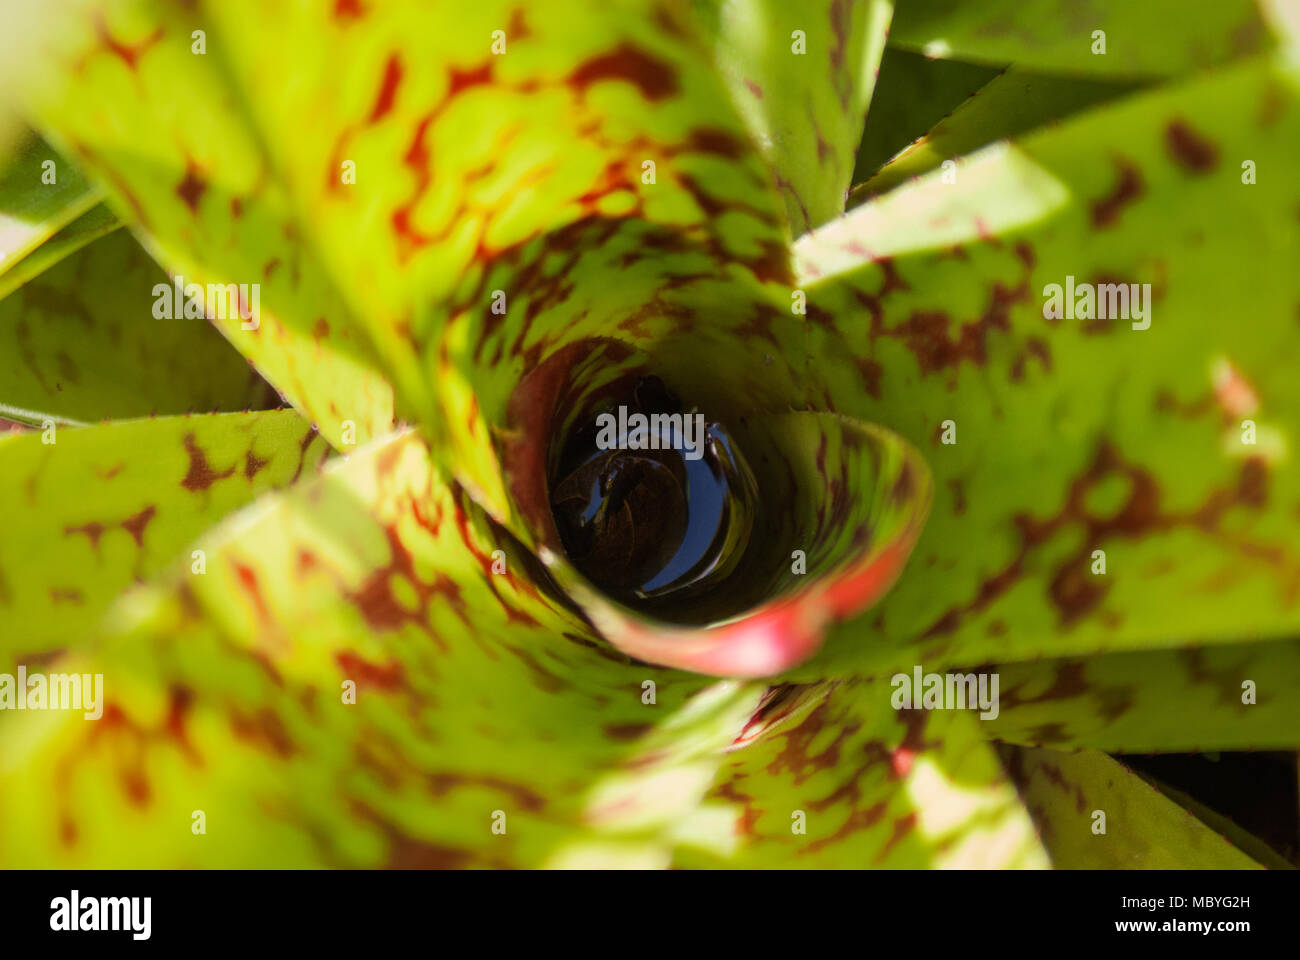 A closeup top view of a Neoregelia ‘Spotted Night’ bromeliad plant with water on its center and the sunlight hitting it. Stock Photo